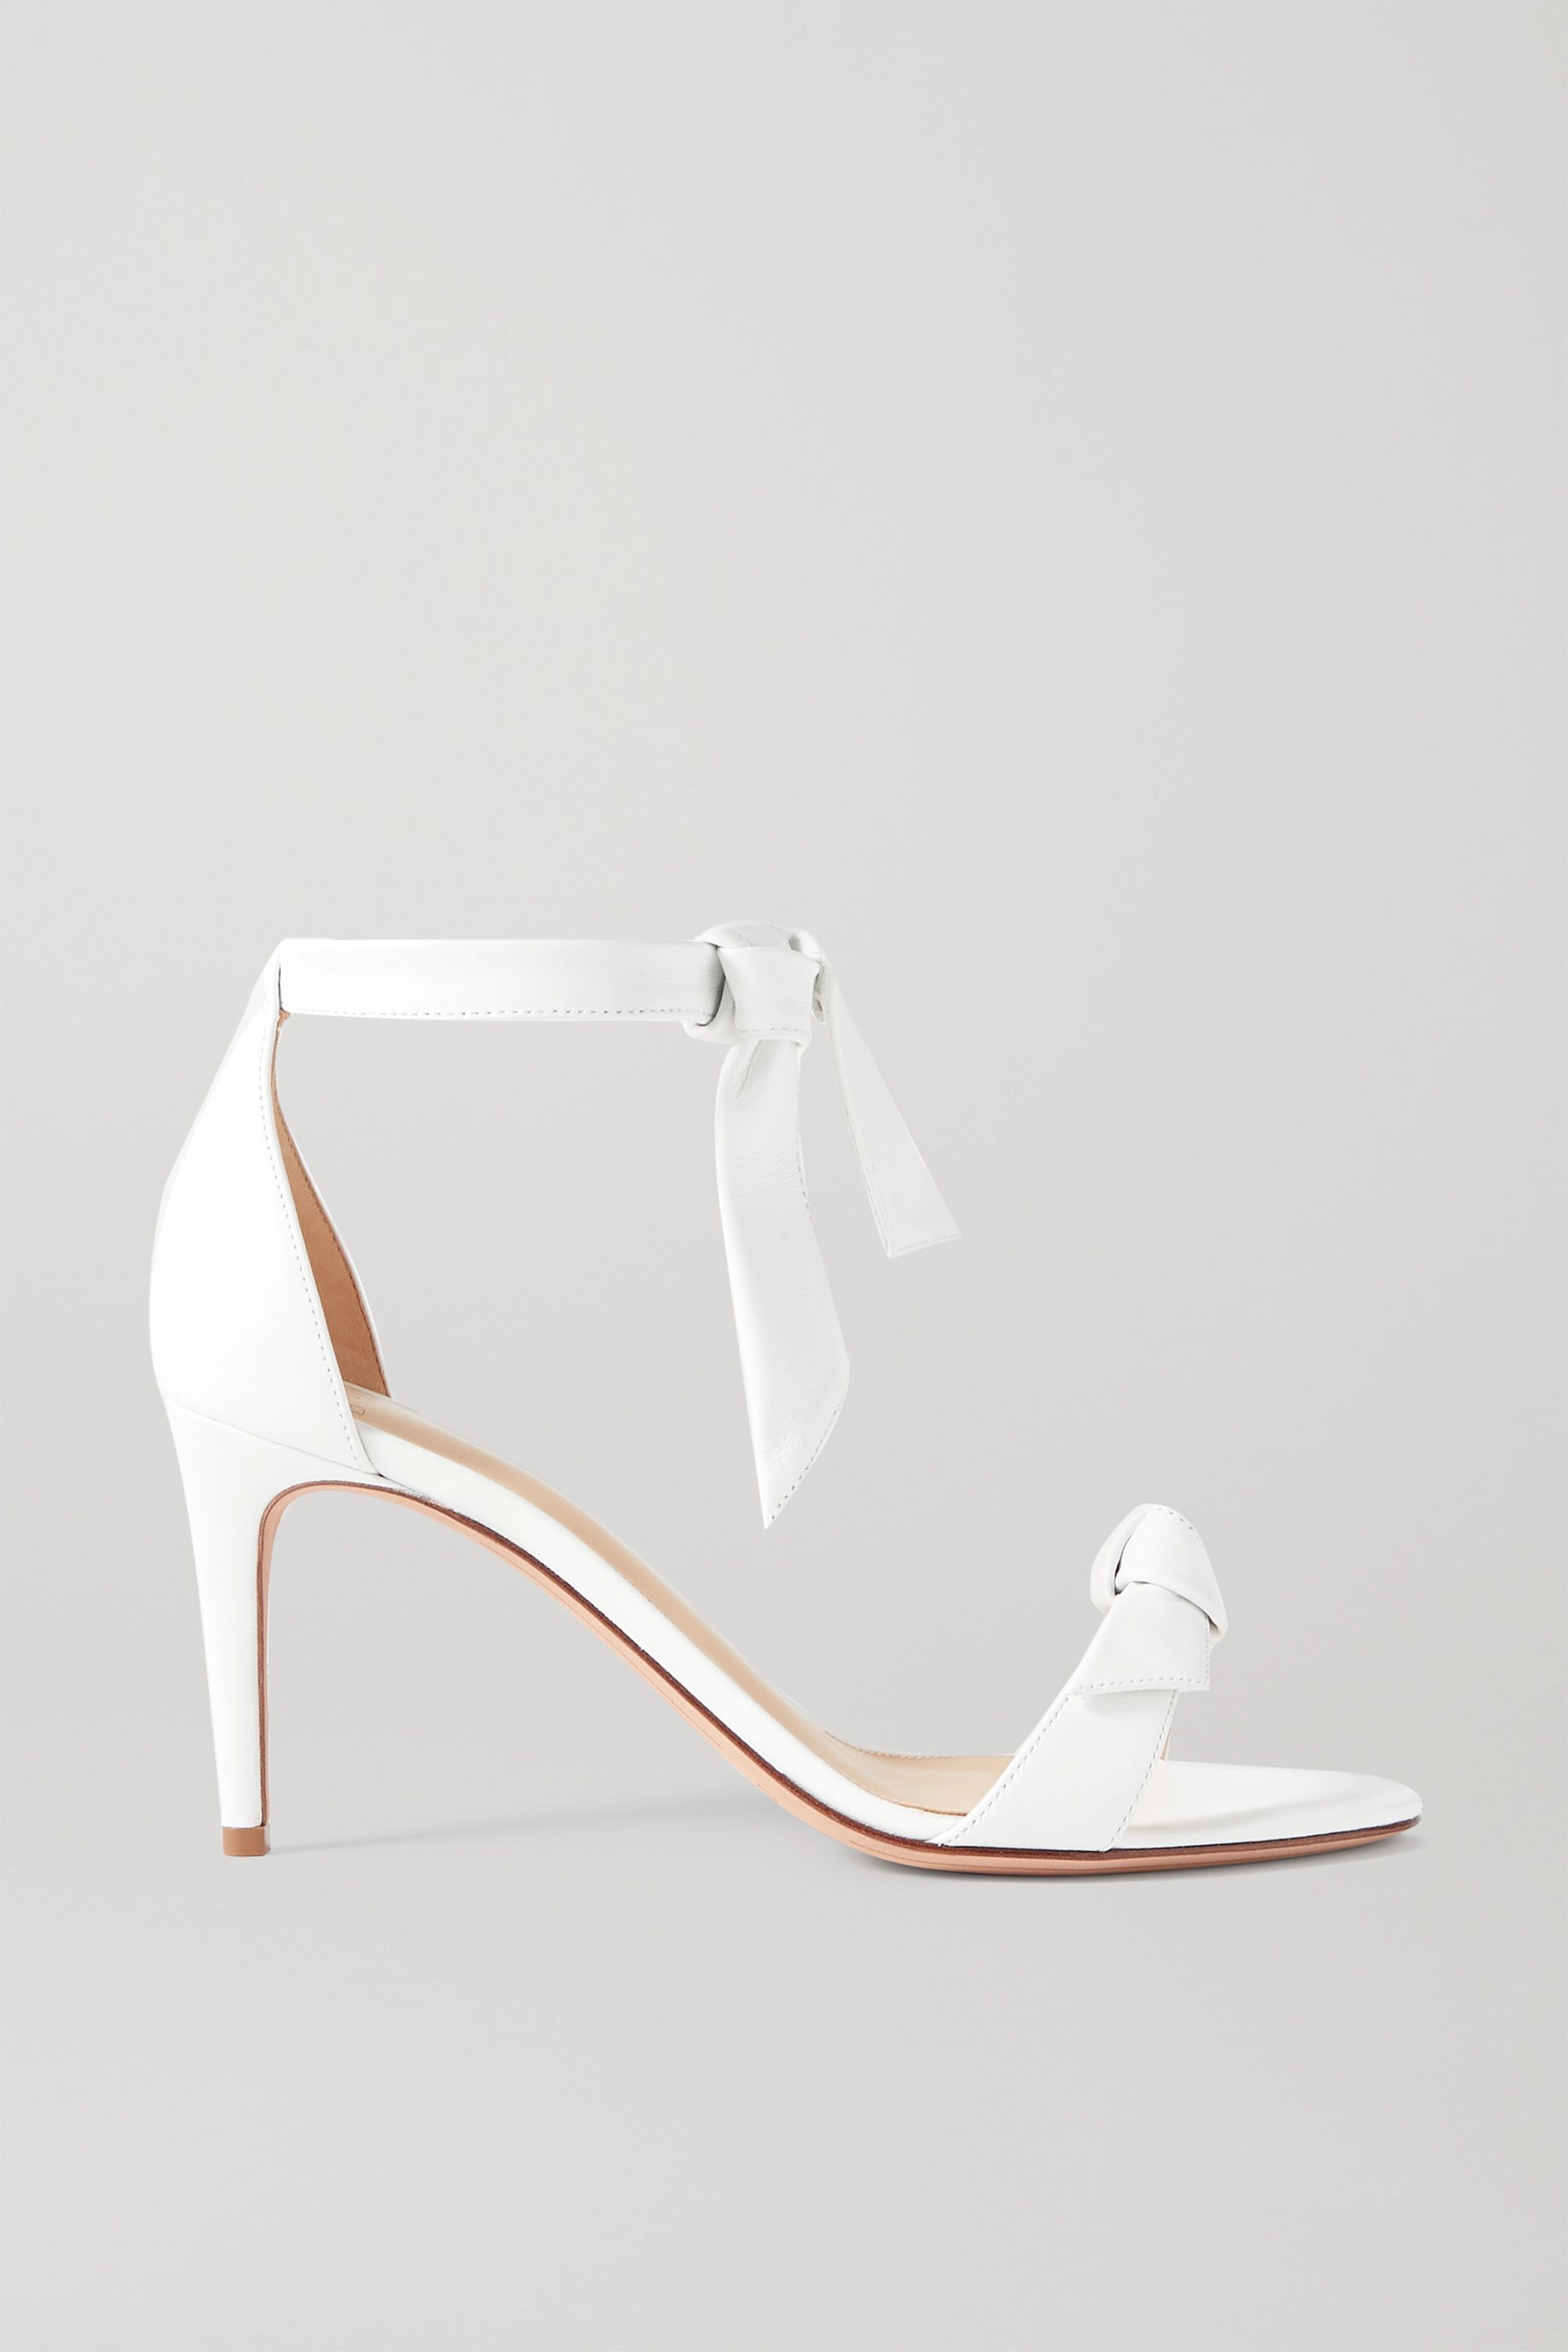 most comfortable wedding shoes 219